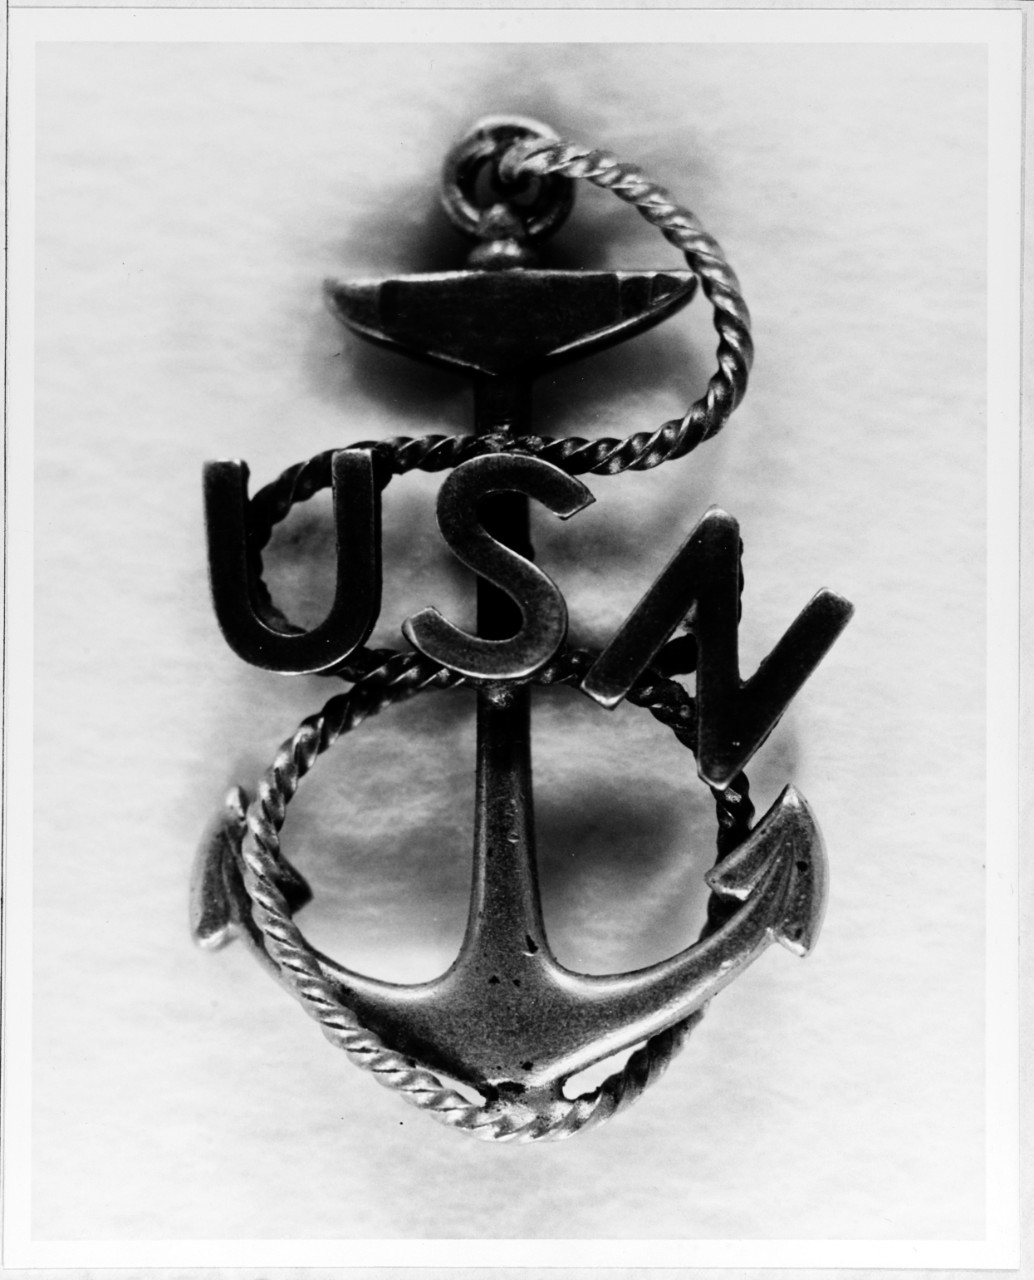 Photo #: NH 65511 Chief Petty Officer's Insignia